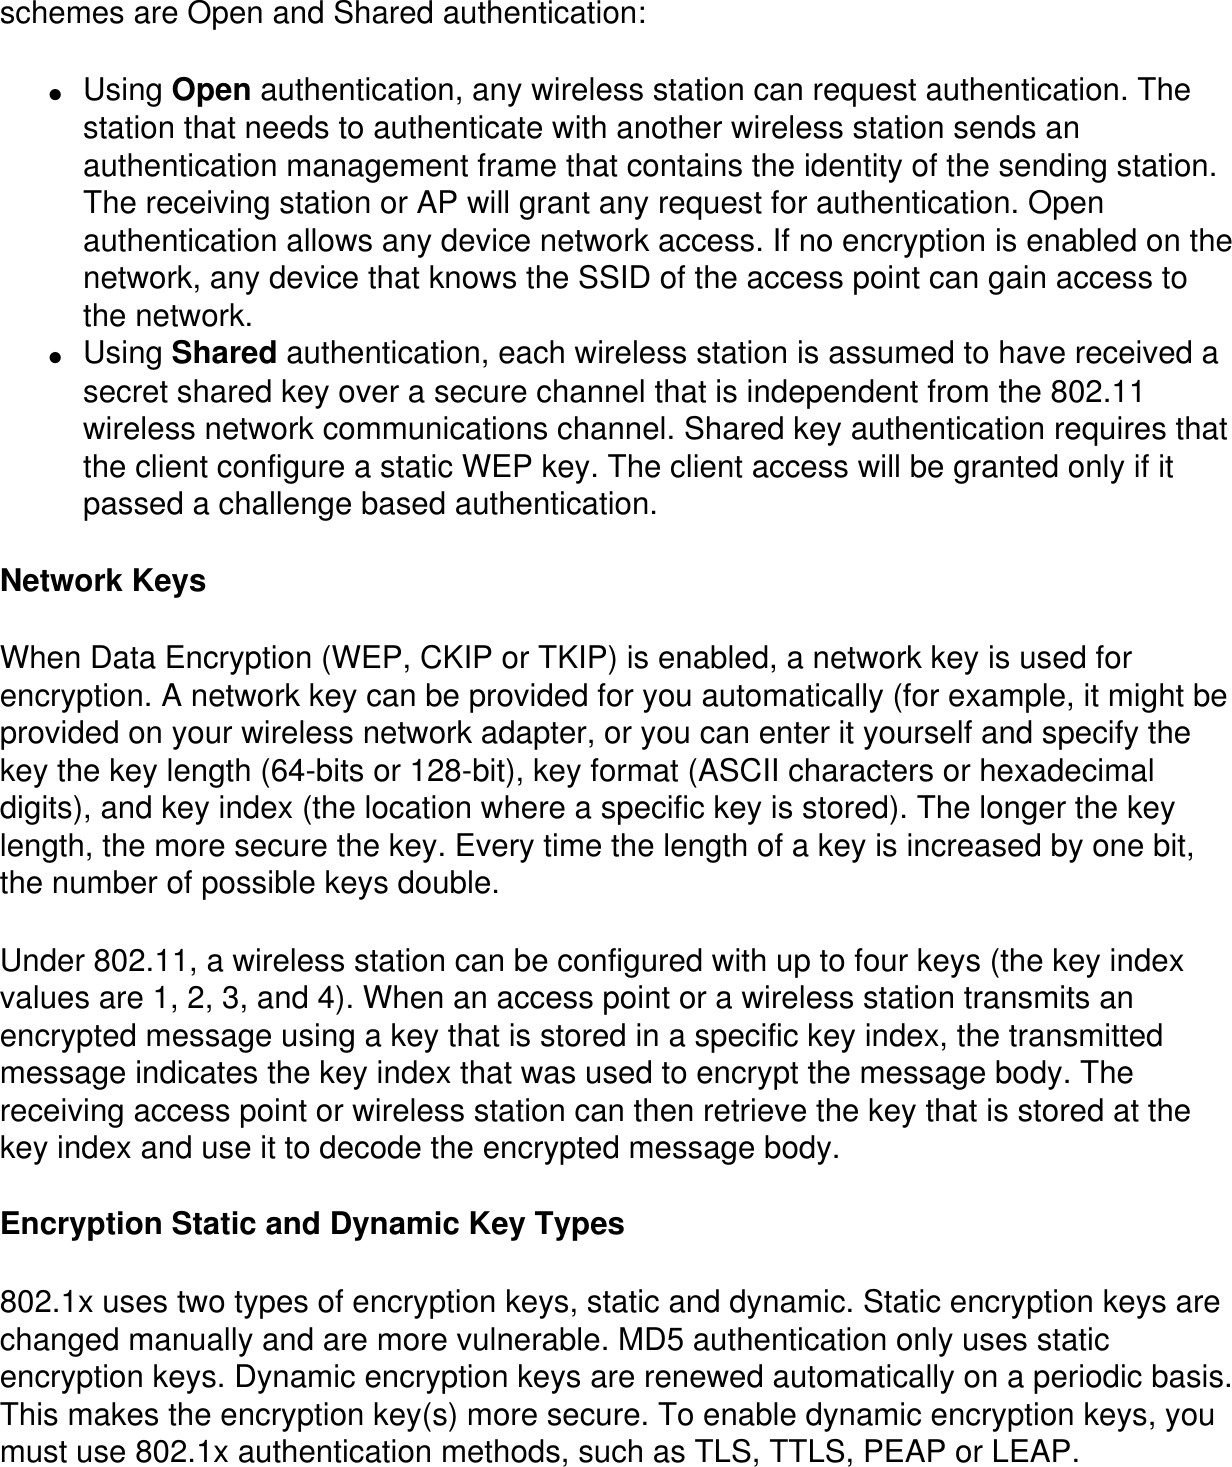 schemes are Open and Shared authentication:●     Using Open authentication, any wireless station can request authentication. The station that needs to authenticate with another wireless station sends an authentication management frame that contains the identity of the sending station. The receiving station or AP will grant any request for authentication. Open authentication allows any device network access. If no encryption is enabled on the network, any device that knows the SSID of the access point can gain access to the network.●     Using Shared authentication, each wireless station is assumed to have received a secret shared key over a secure channel that is independent from the 802.11 wireless network communications channel. Shared key authentication requires that the client configure a static WEP key. The client access will be granted only if it passed a challenge based authentication.Network KeysWhen Data Encryption (WEP, CKIP or TKIP) is enabled, a network key is used for encryption. A network key can be provided for you automatically (for example, it might be provided on your wireless network adapter, or you can enter it yourself and specify the key the key length (64-bits or 128-bit), key format (ASCII characters or hexadecimal digits), and key index (the location where a specific key is stored). The longer the key length, the more secure the key. Every time the length of a key is increased by one bit, the number of possible keys double.Under 802.11, a wireless station can be configured with up to four keys (the key index values are 1, 2, 3, and 4). When an access point or a wireless station transmits an encrypted message using a key that is stored in a specific key index, the transmitted message indicates the key index that was used to encrypt the message body. The receiving access point or wireless station can then retrieve the key that is stored at the key index and use it to decode the encrypted message body.Encryption Static and Dynamic Key Types802.1x uses two types of encryption keys, static and dynamic. Static encryption keys are changed manually and are more vulnerable. MD5 authentication only uses static encryption keys. Dynamic encryption keys are renewed automatically on a periodic basis. This makes the encryption key(s) more secure. To enable dynamic encryption keys, you must use 802.1x authentication methods, such as TLS, TTLS, PEAP or LEAP.